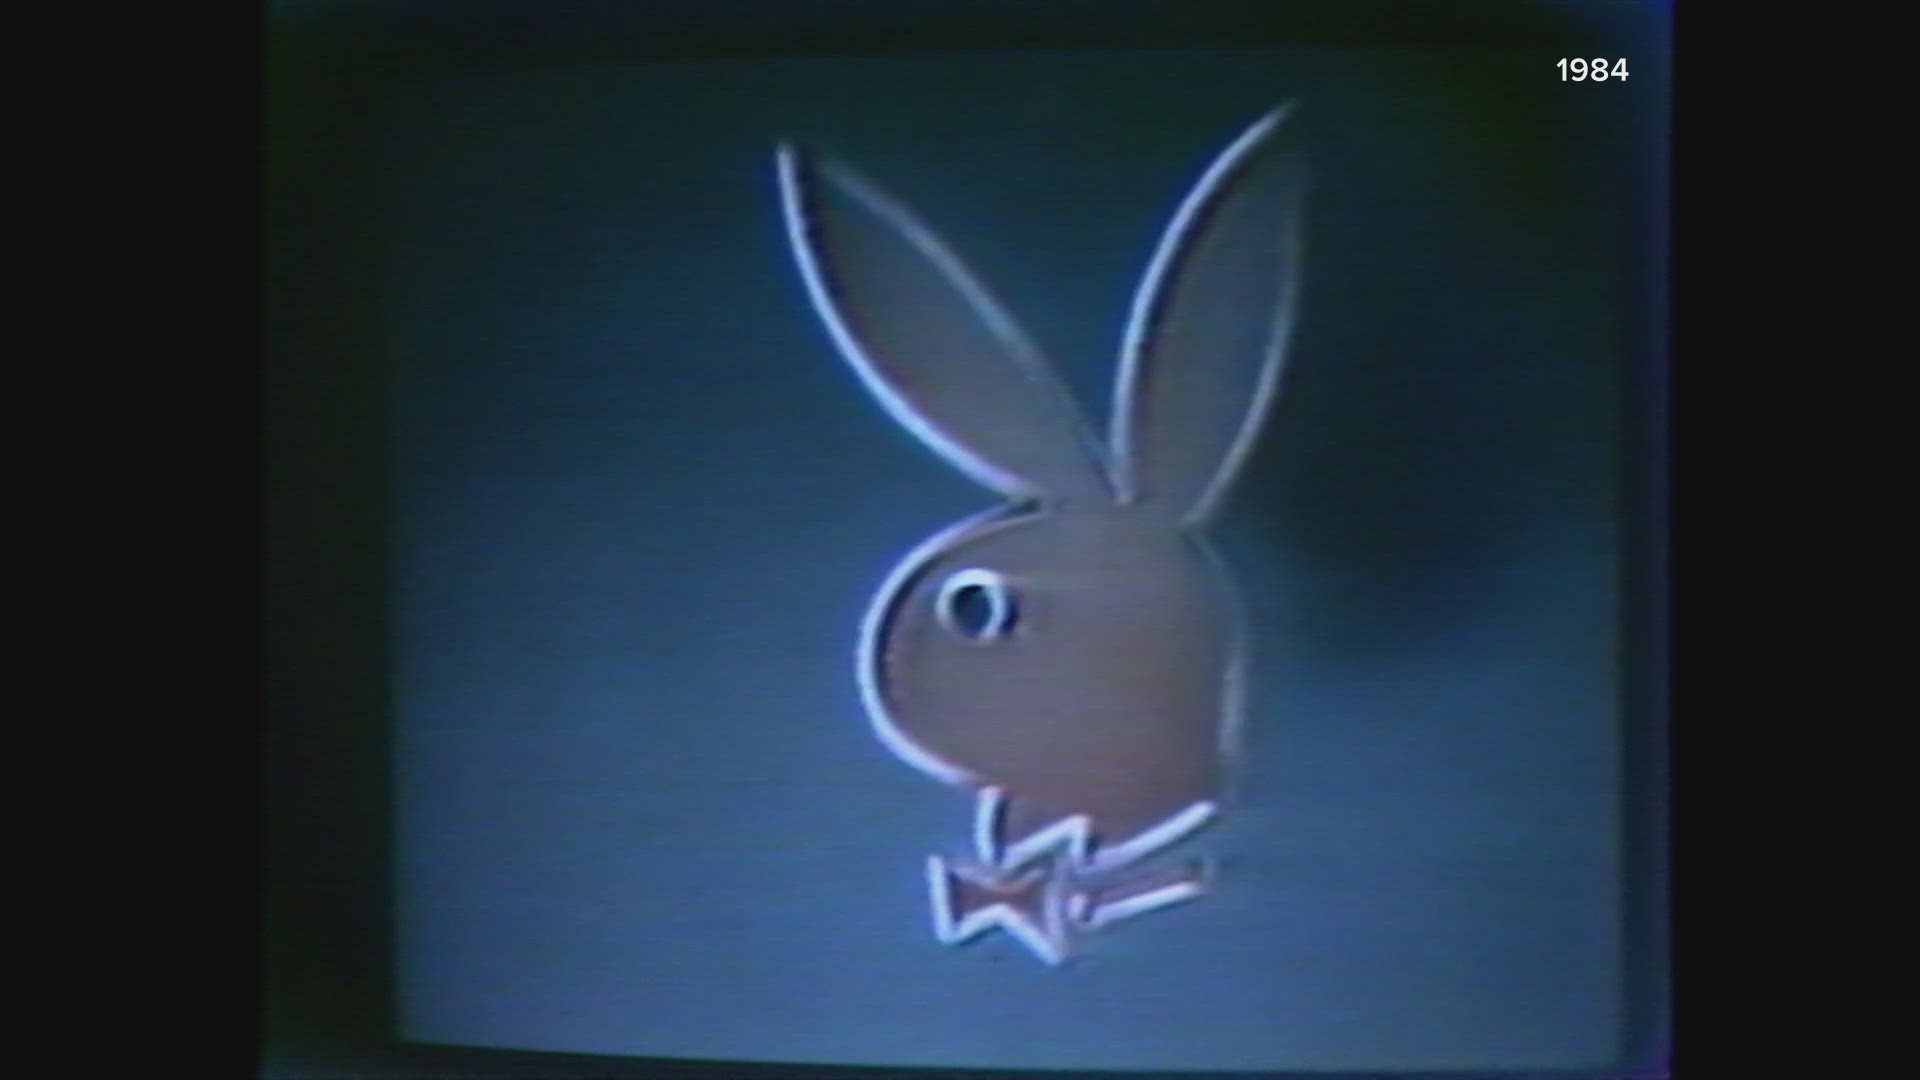 A group of concerned citizens was trying to get rid of "The Playboy Channel."